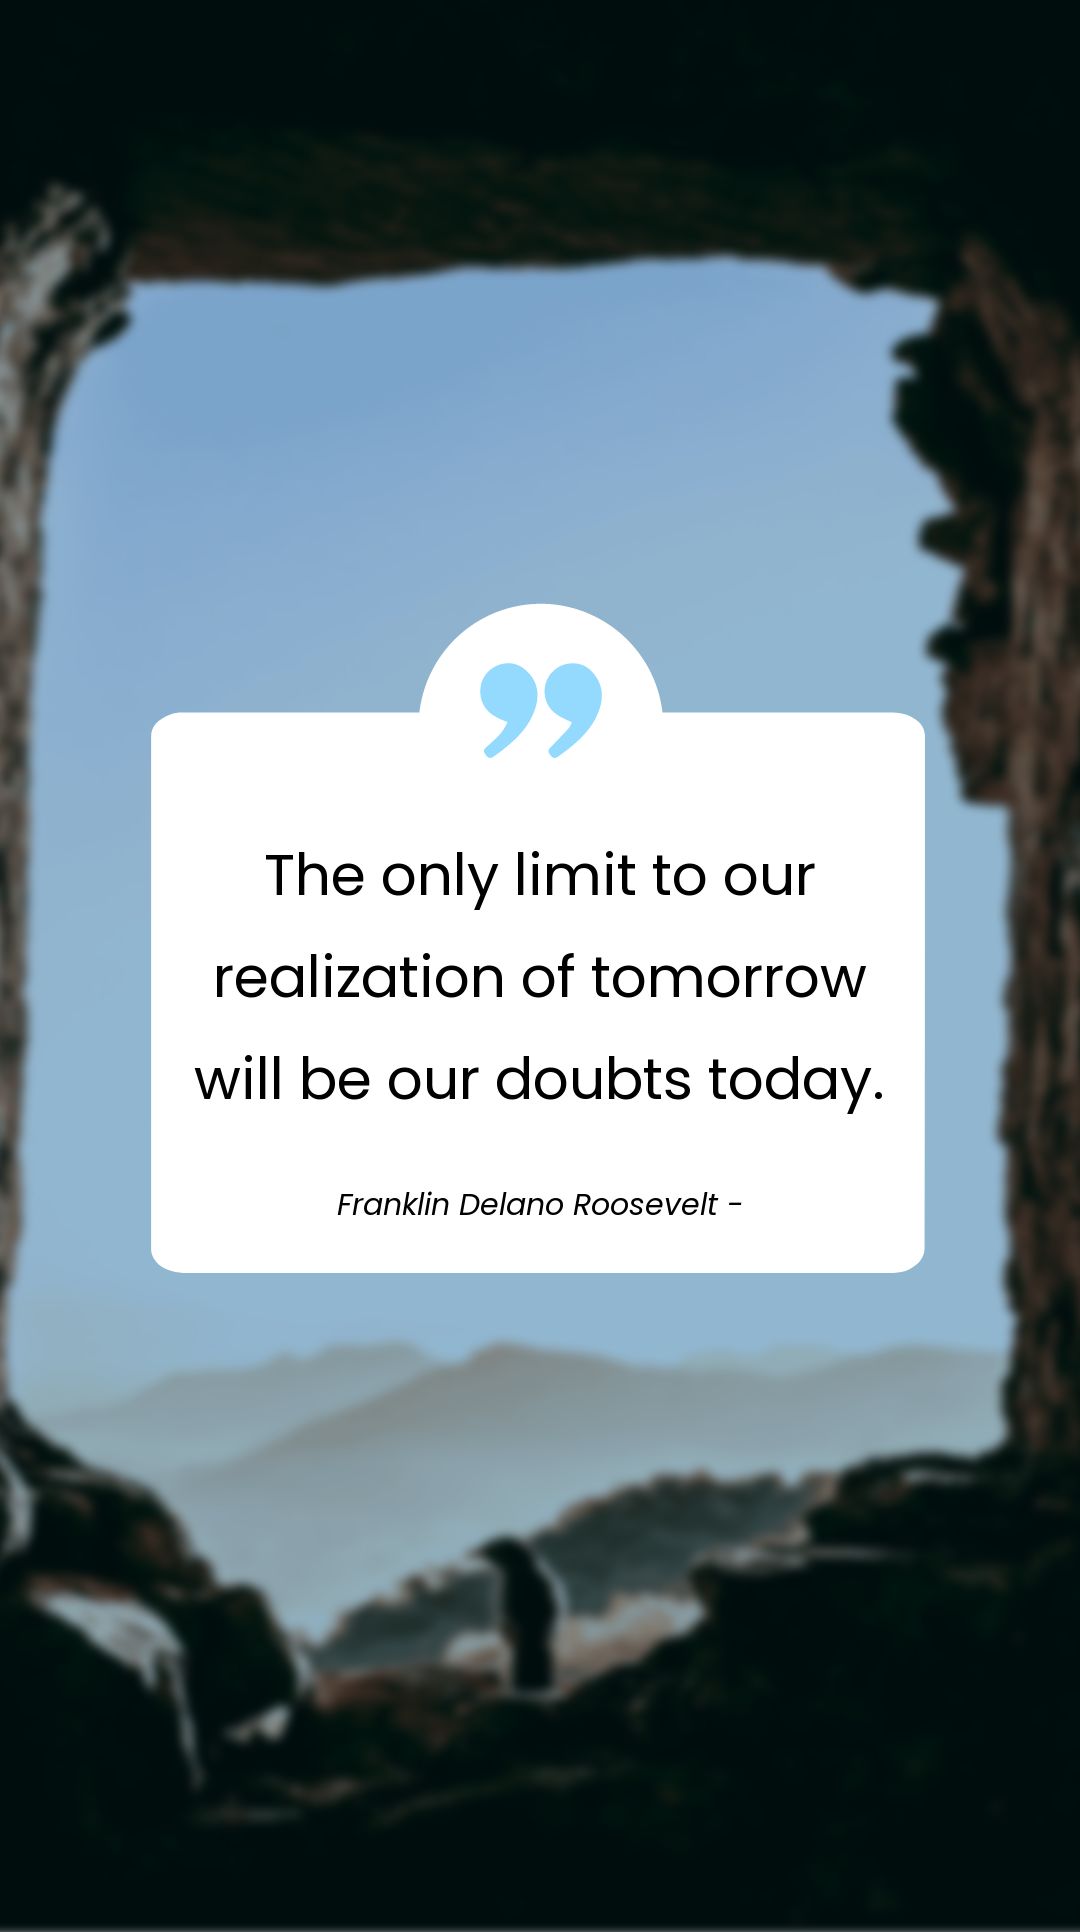 Franklin Delano Roosevelt - The only limit to our realization of tomorrow will be our doubts today.